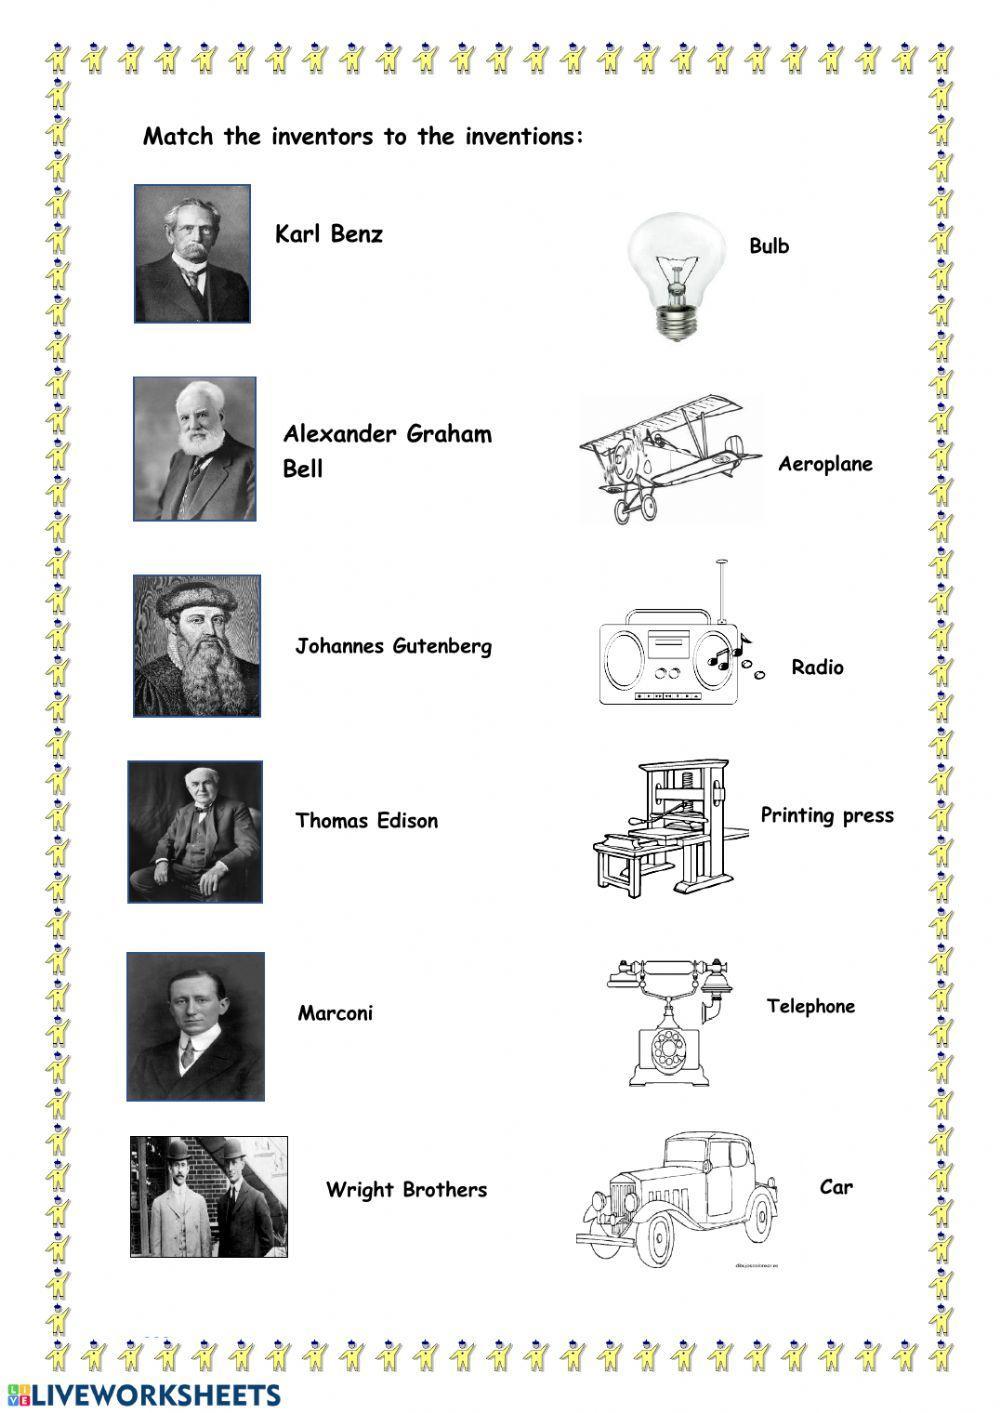 Inventors and inventions